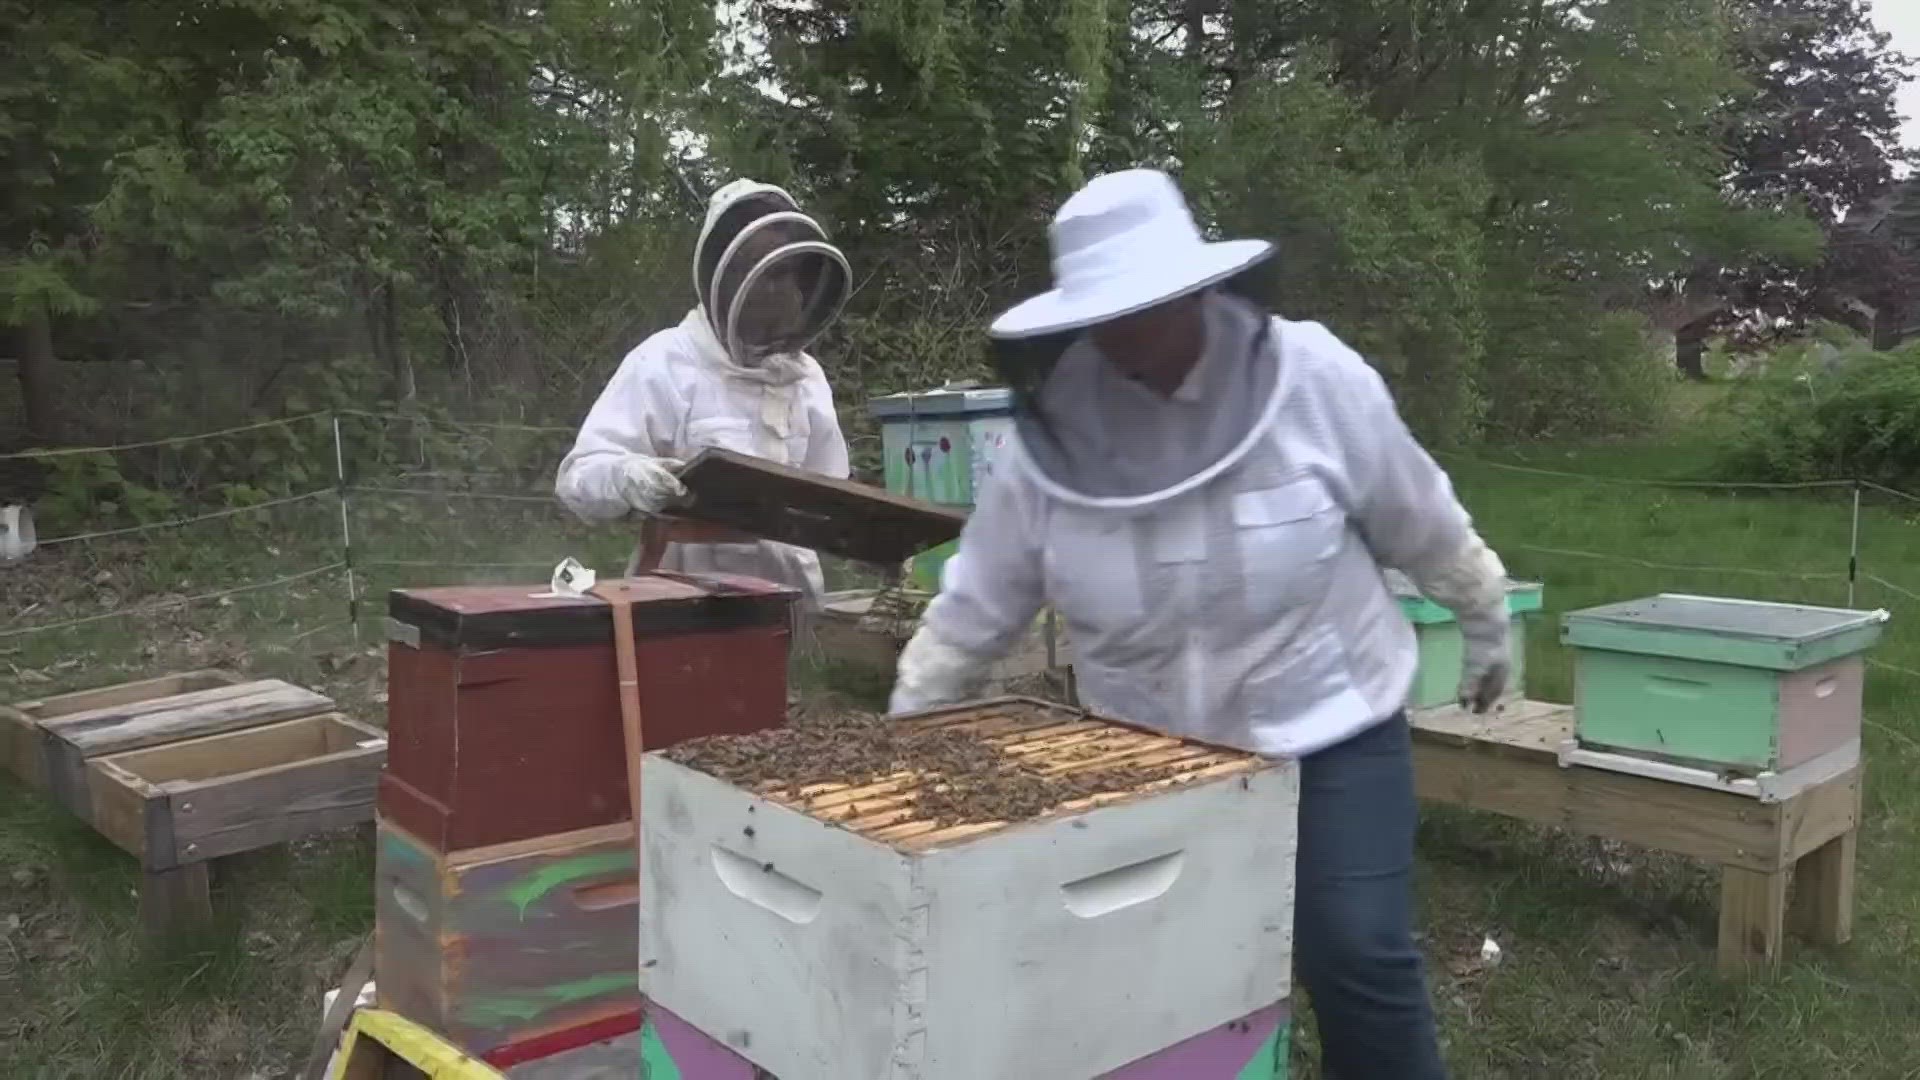 Eleven-year-old Elizabeth Downs, better known as "E," is putting in the work to change the mind of folks her age and address any hesitations about beekeeping.